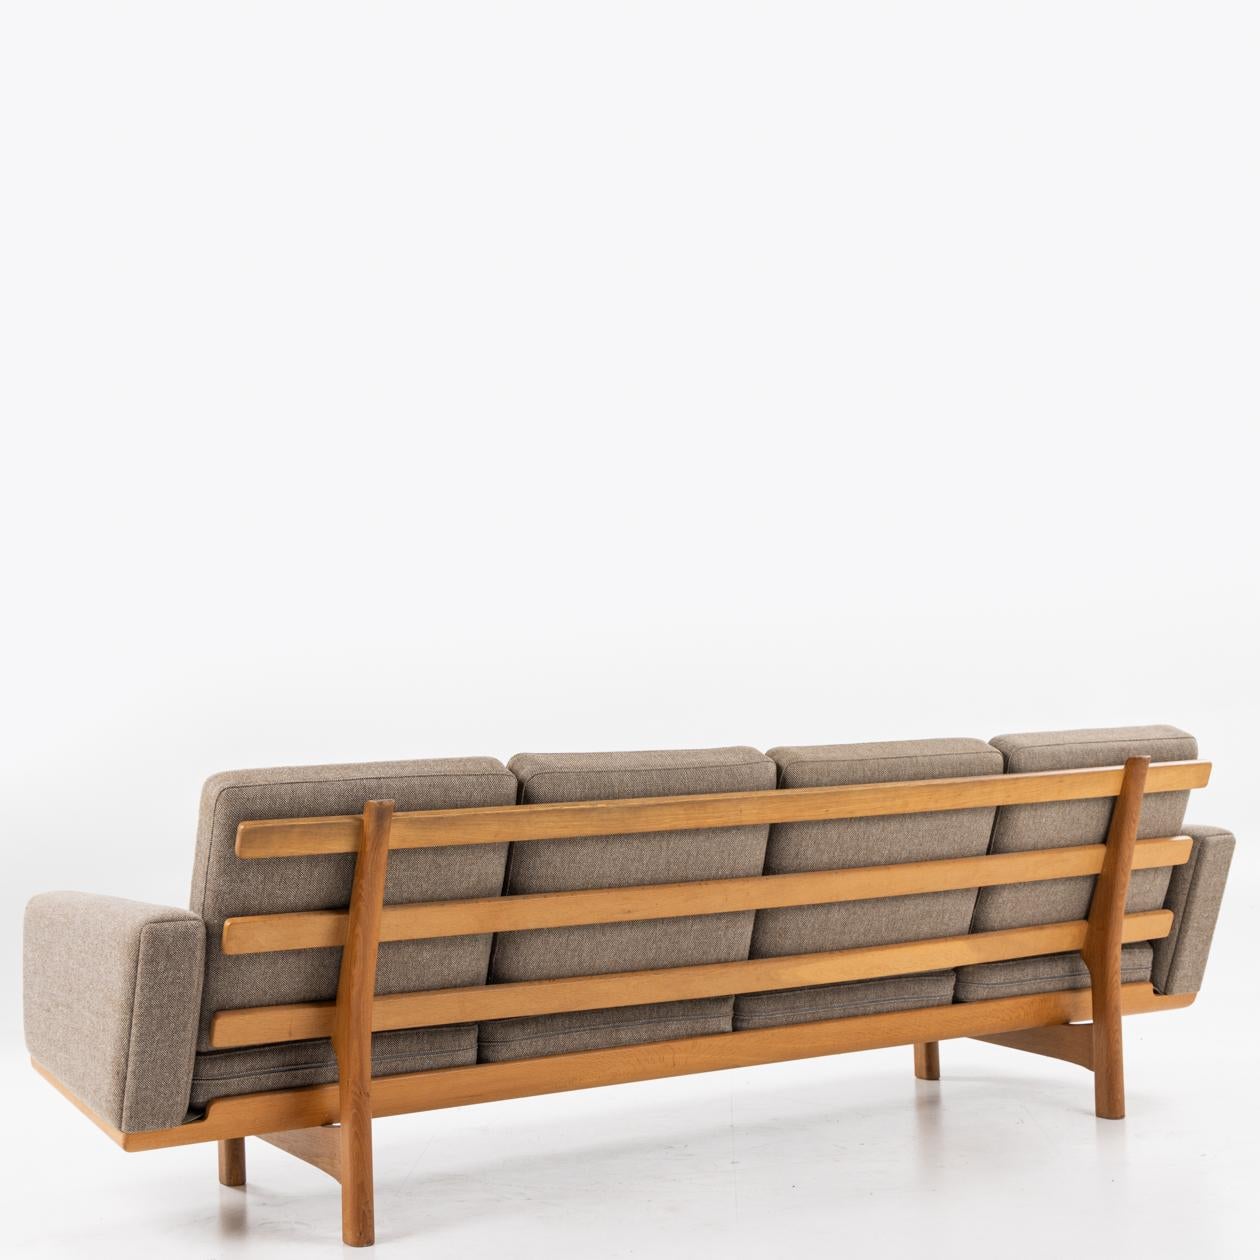 GE 236/4 - 4-seater sofa with frame in patinated oak and cushions in grey/brown textile. Hans J. Wegner / Getama
